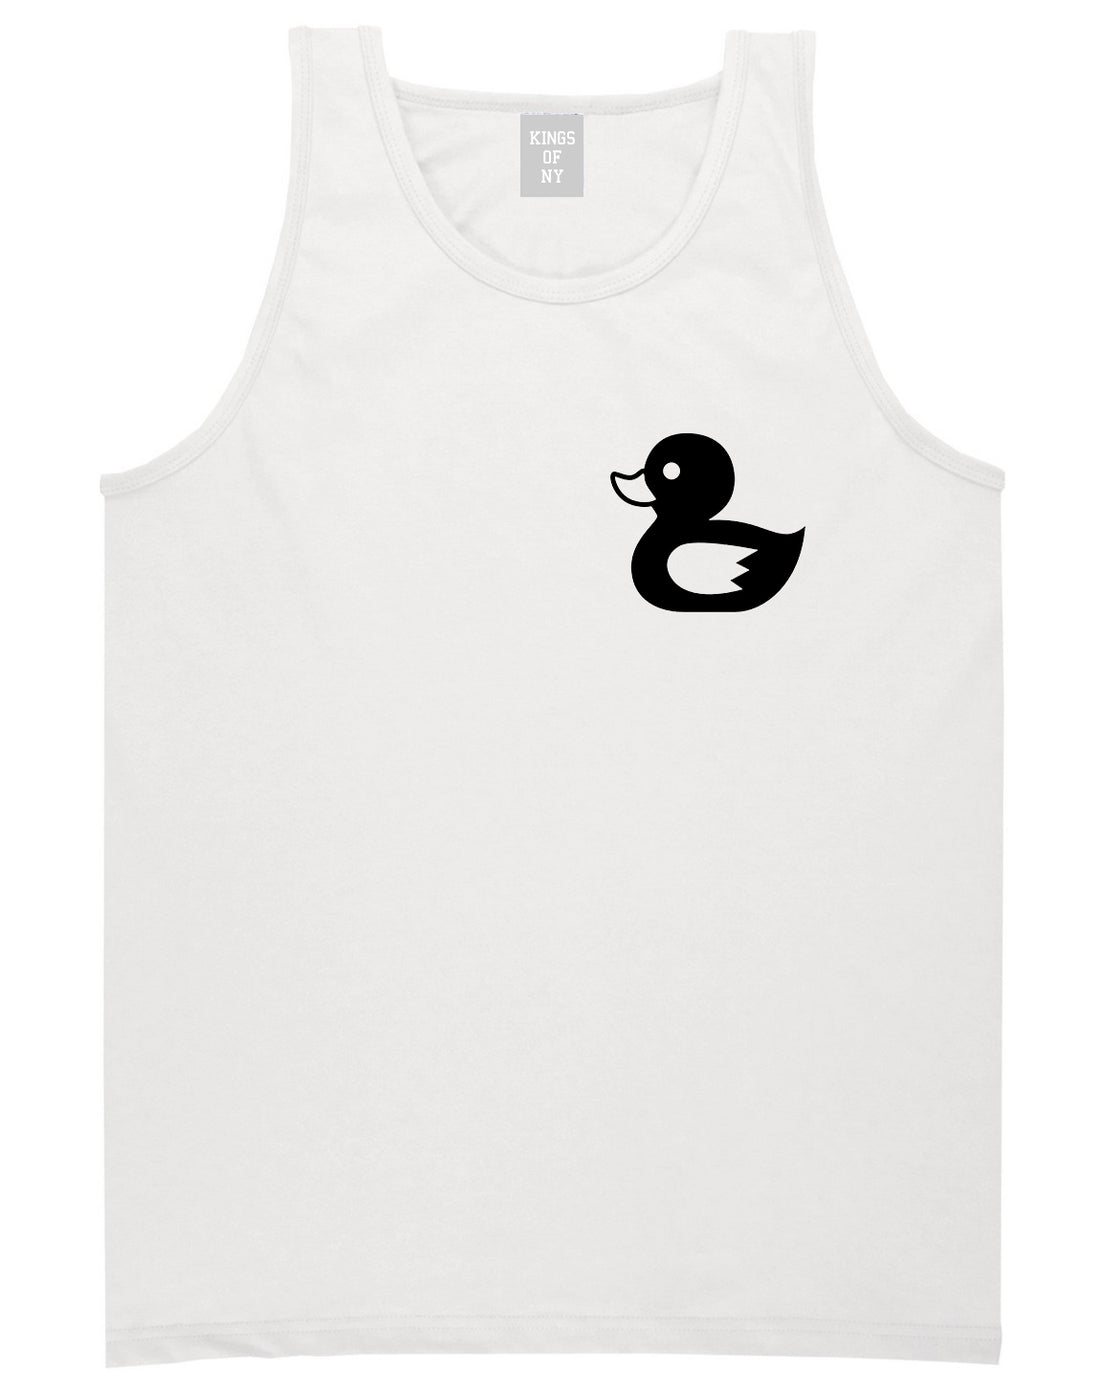 Rubber_Duck_Chest Mens White Tank Top Shirt by Kings Of NY